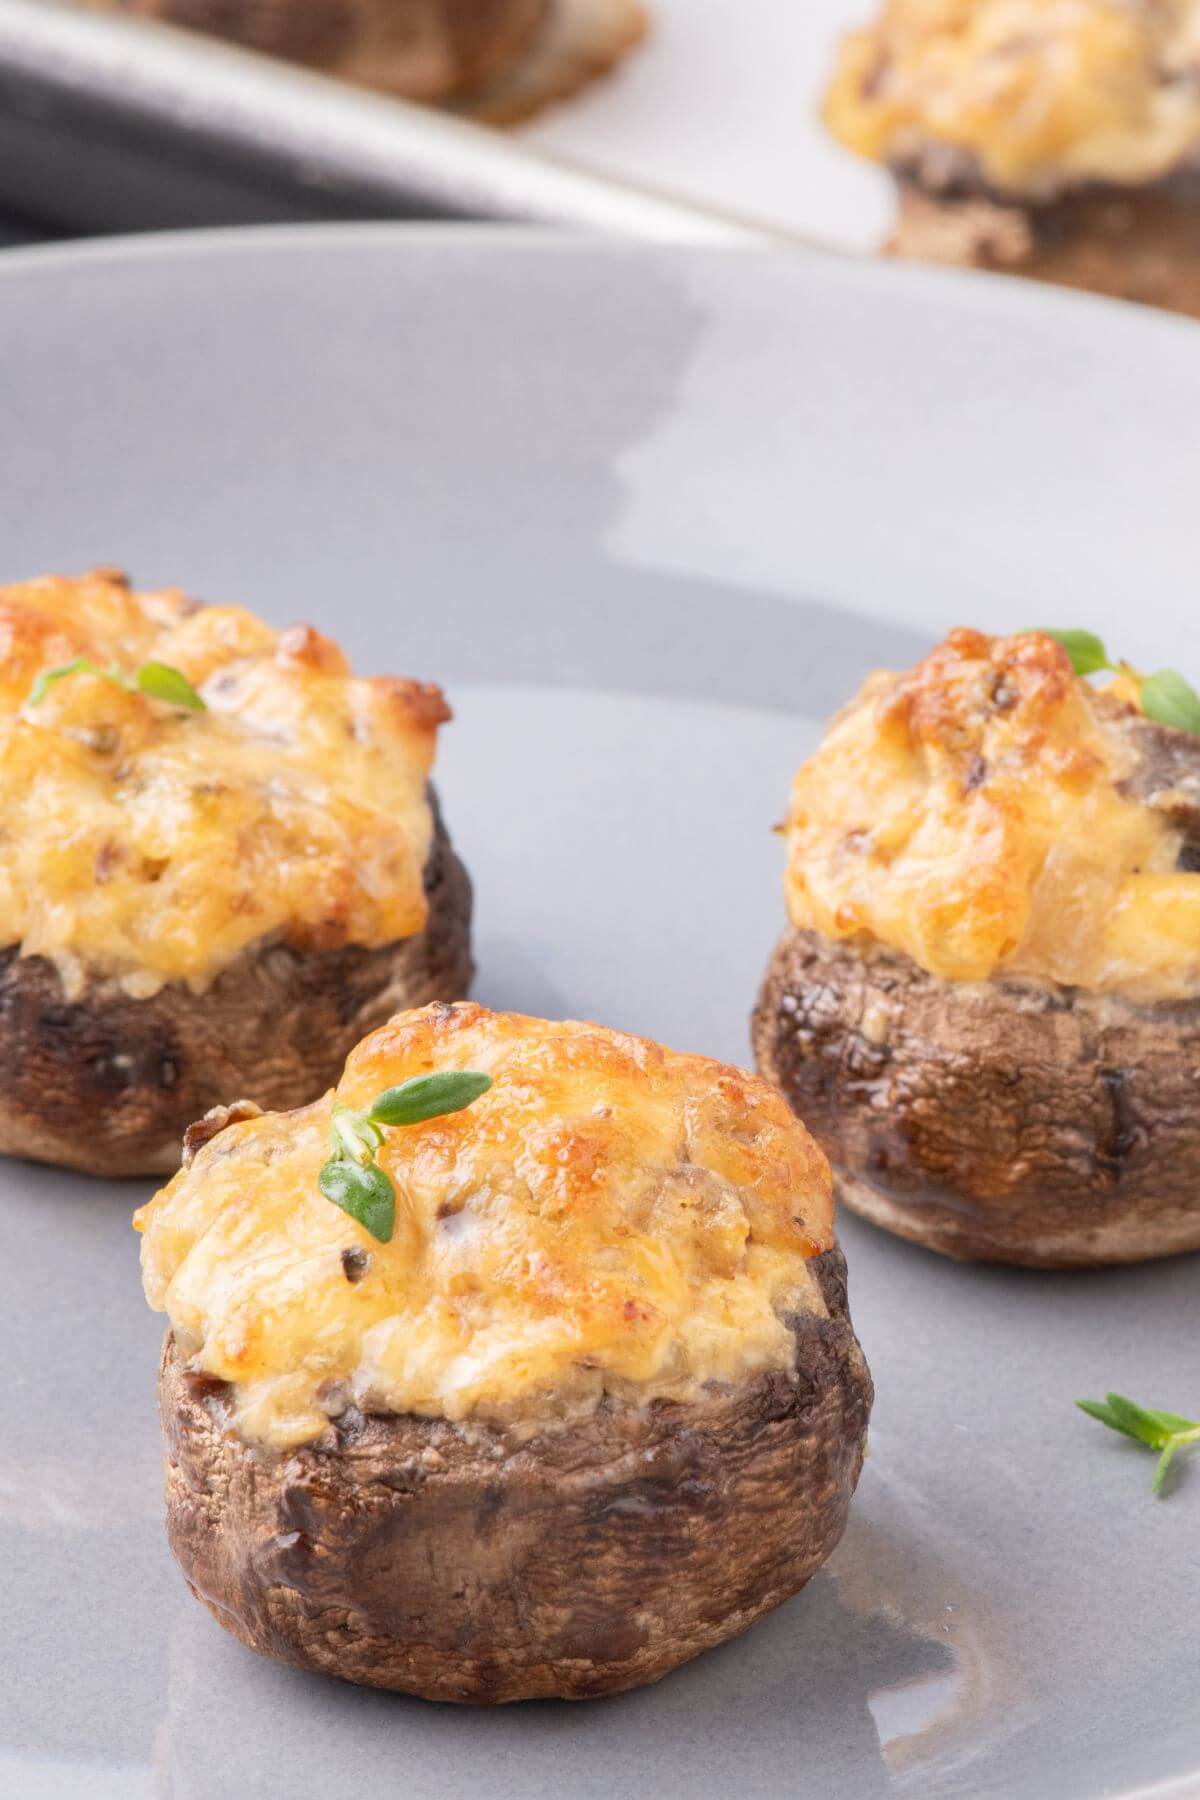 Stuffed mushrooms are topped with gooey cheese.